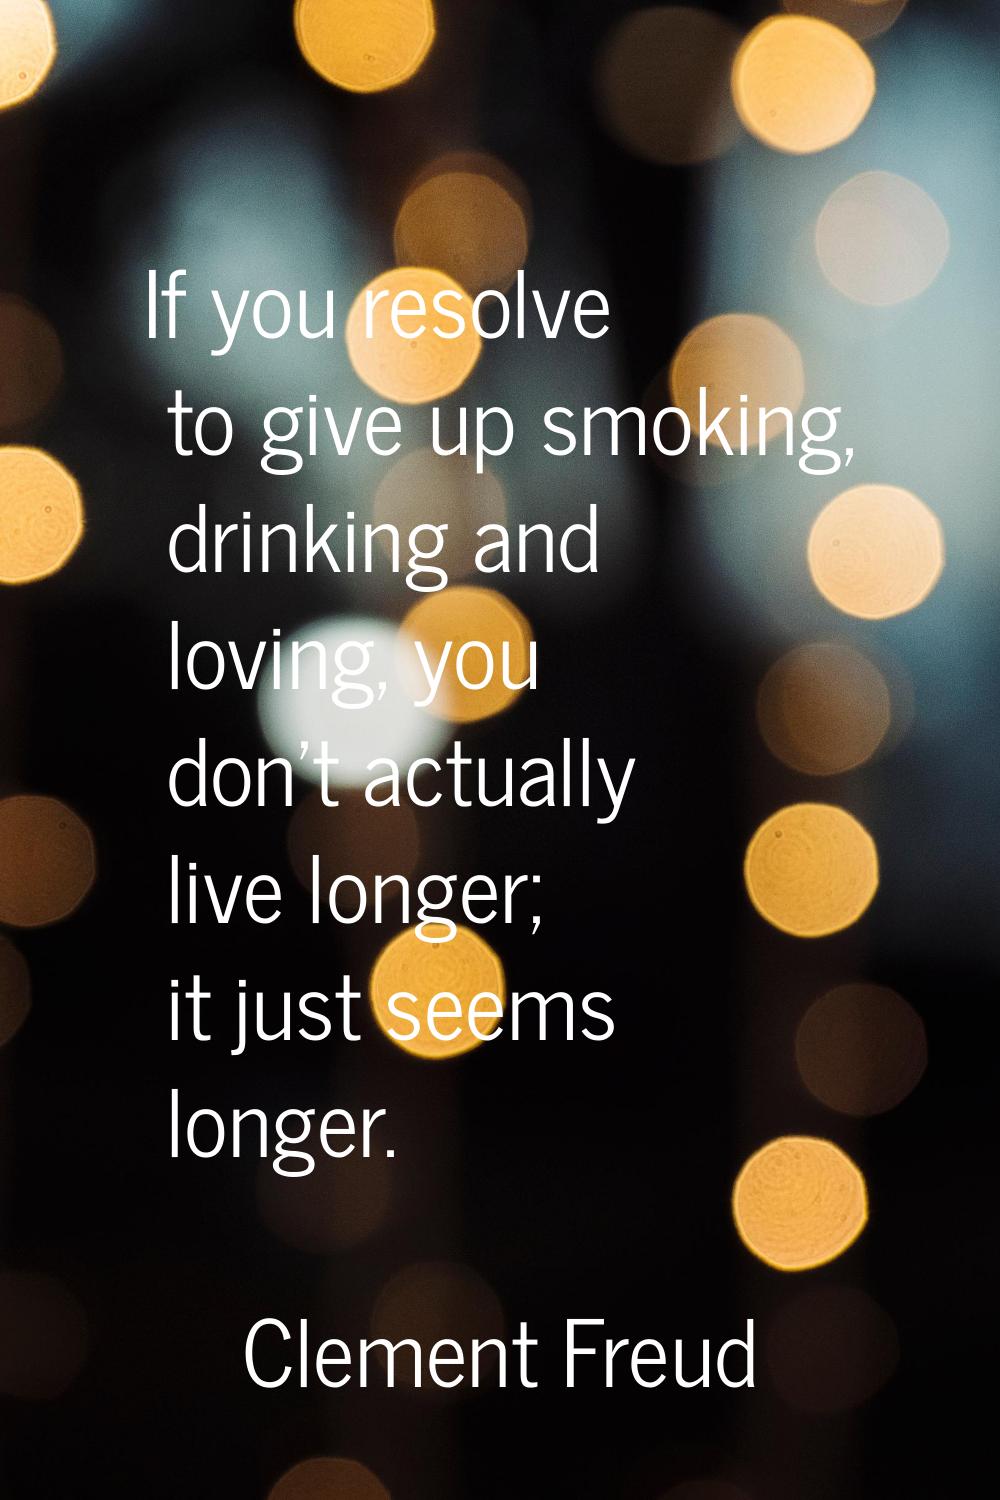 If you resolve to give up smoking, drinking and loving, you don't actually live longer; it just see